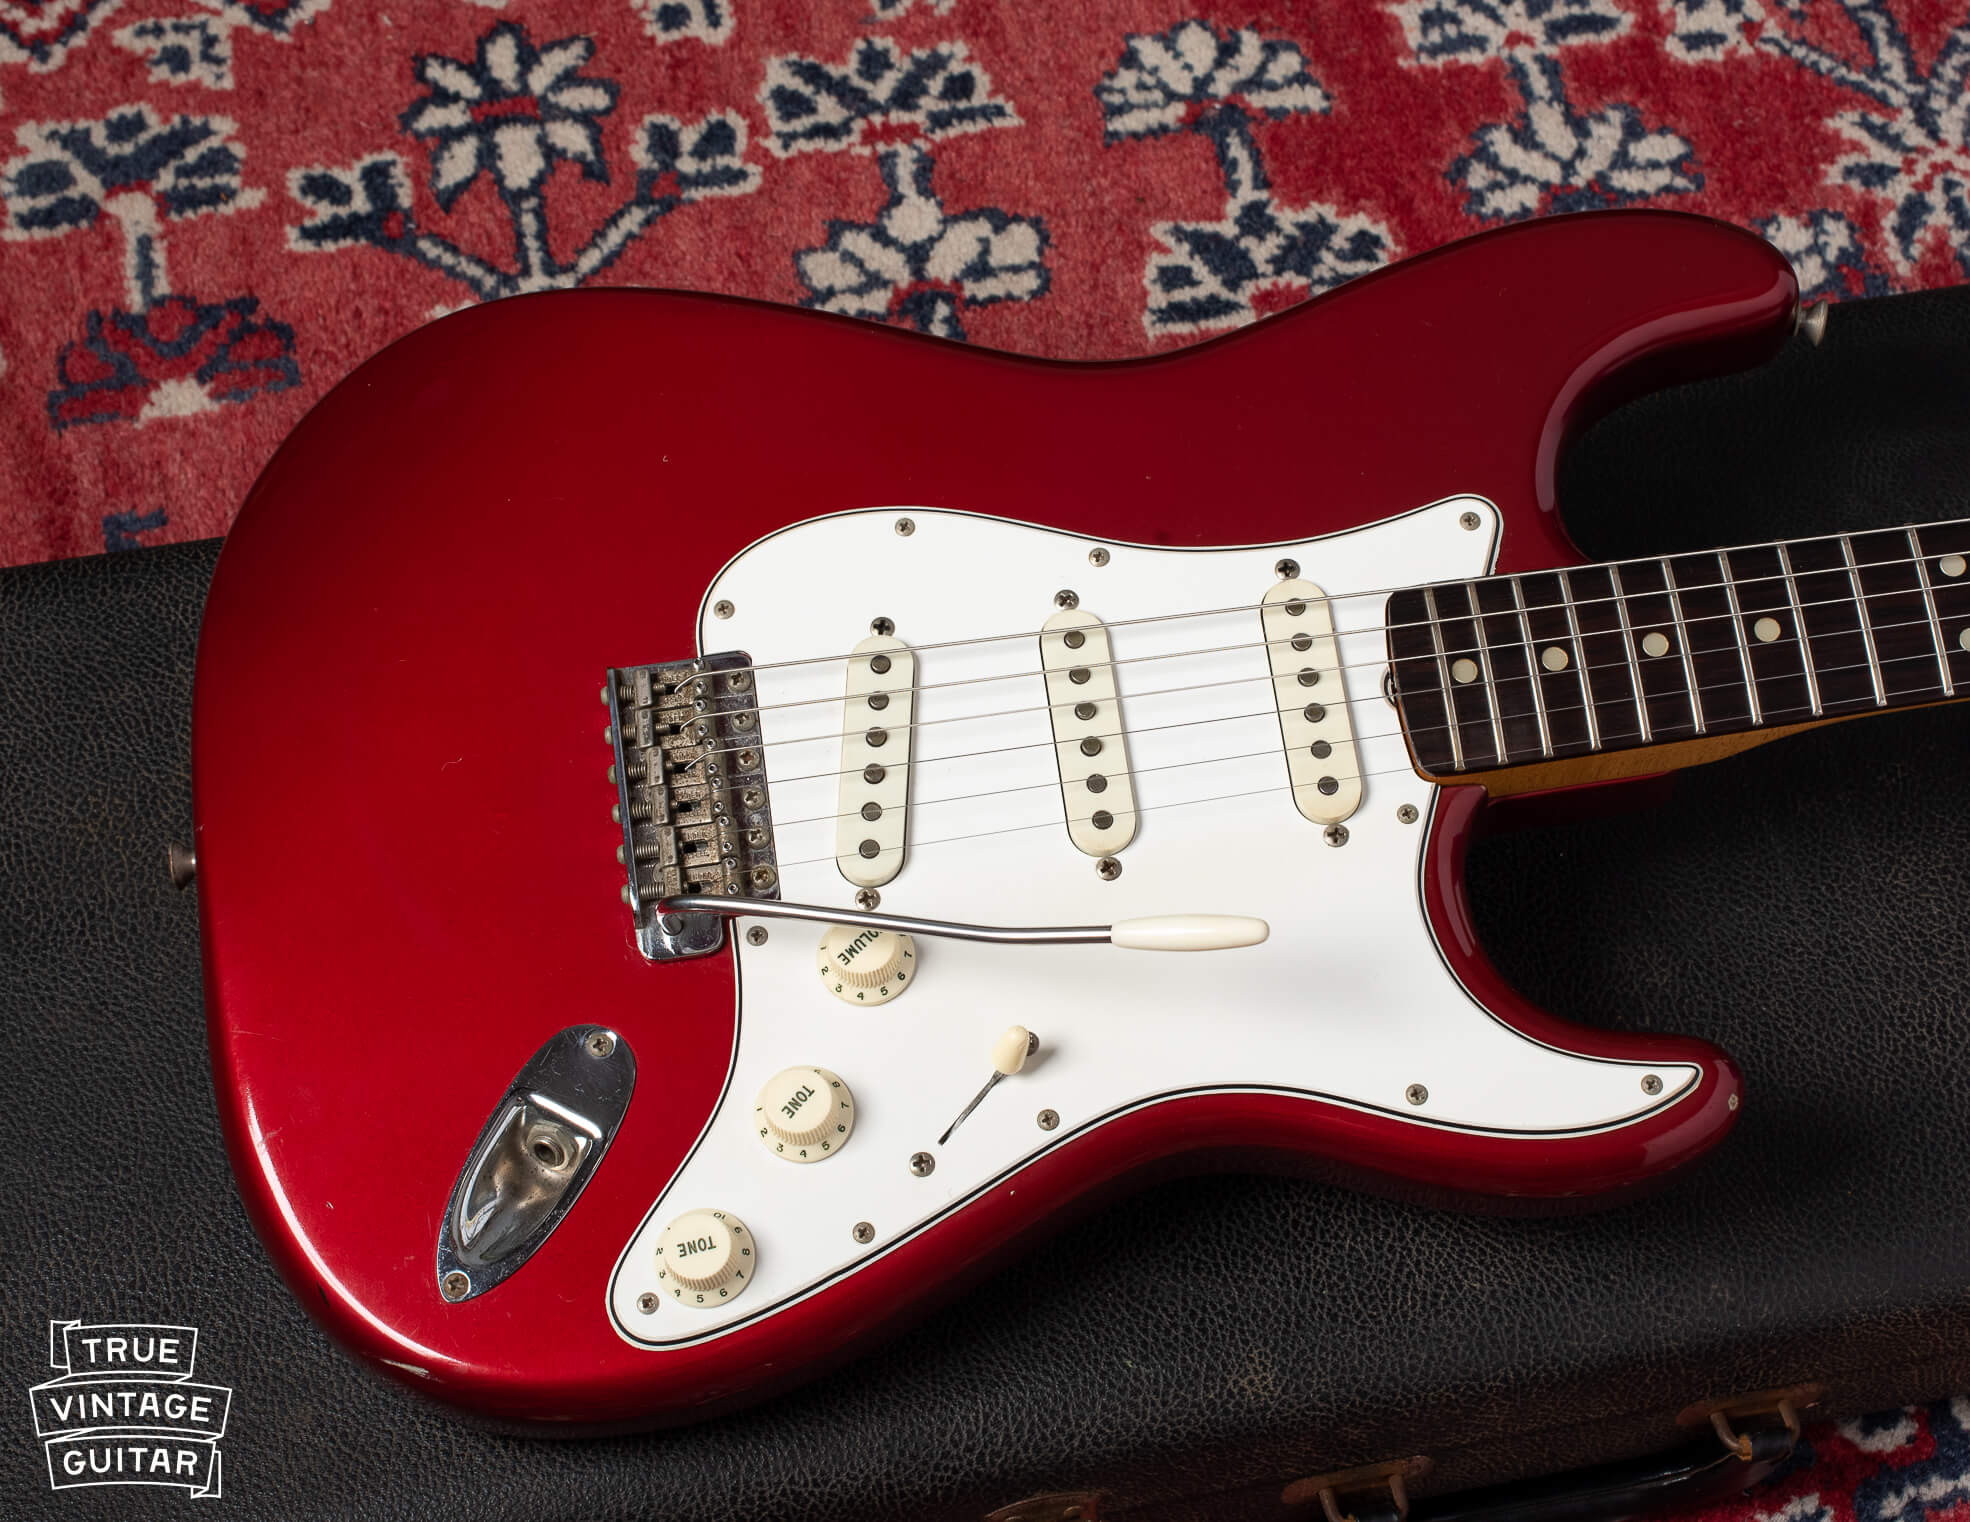 1965 Fender Stratocaster with custom color Candy Apple Red metallic finish